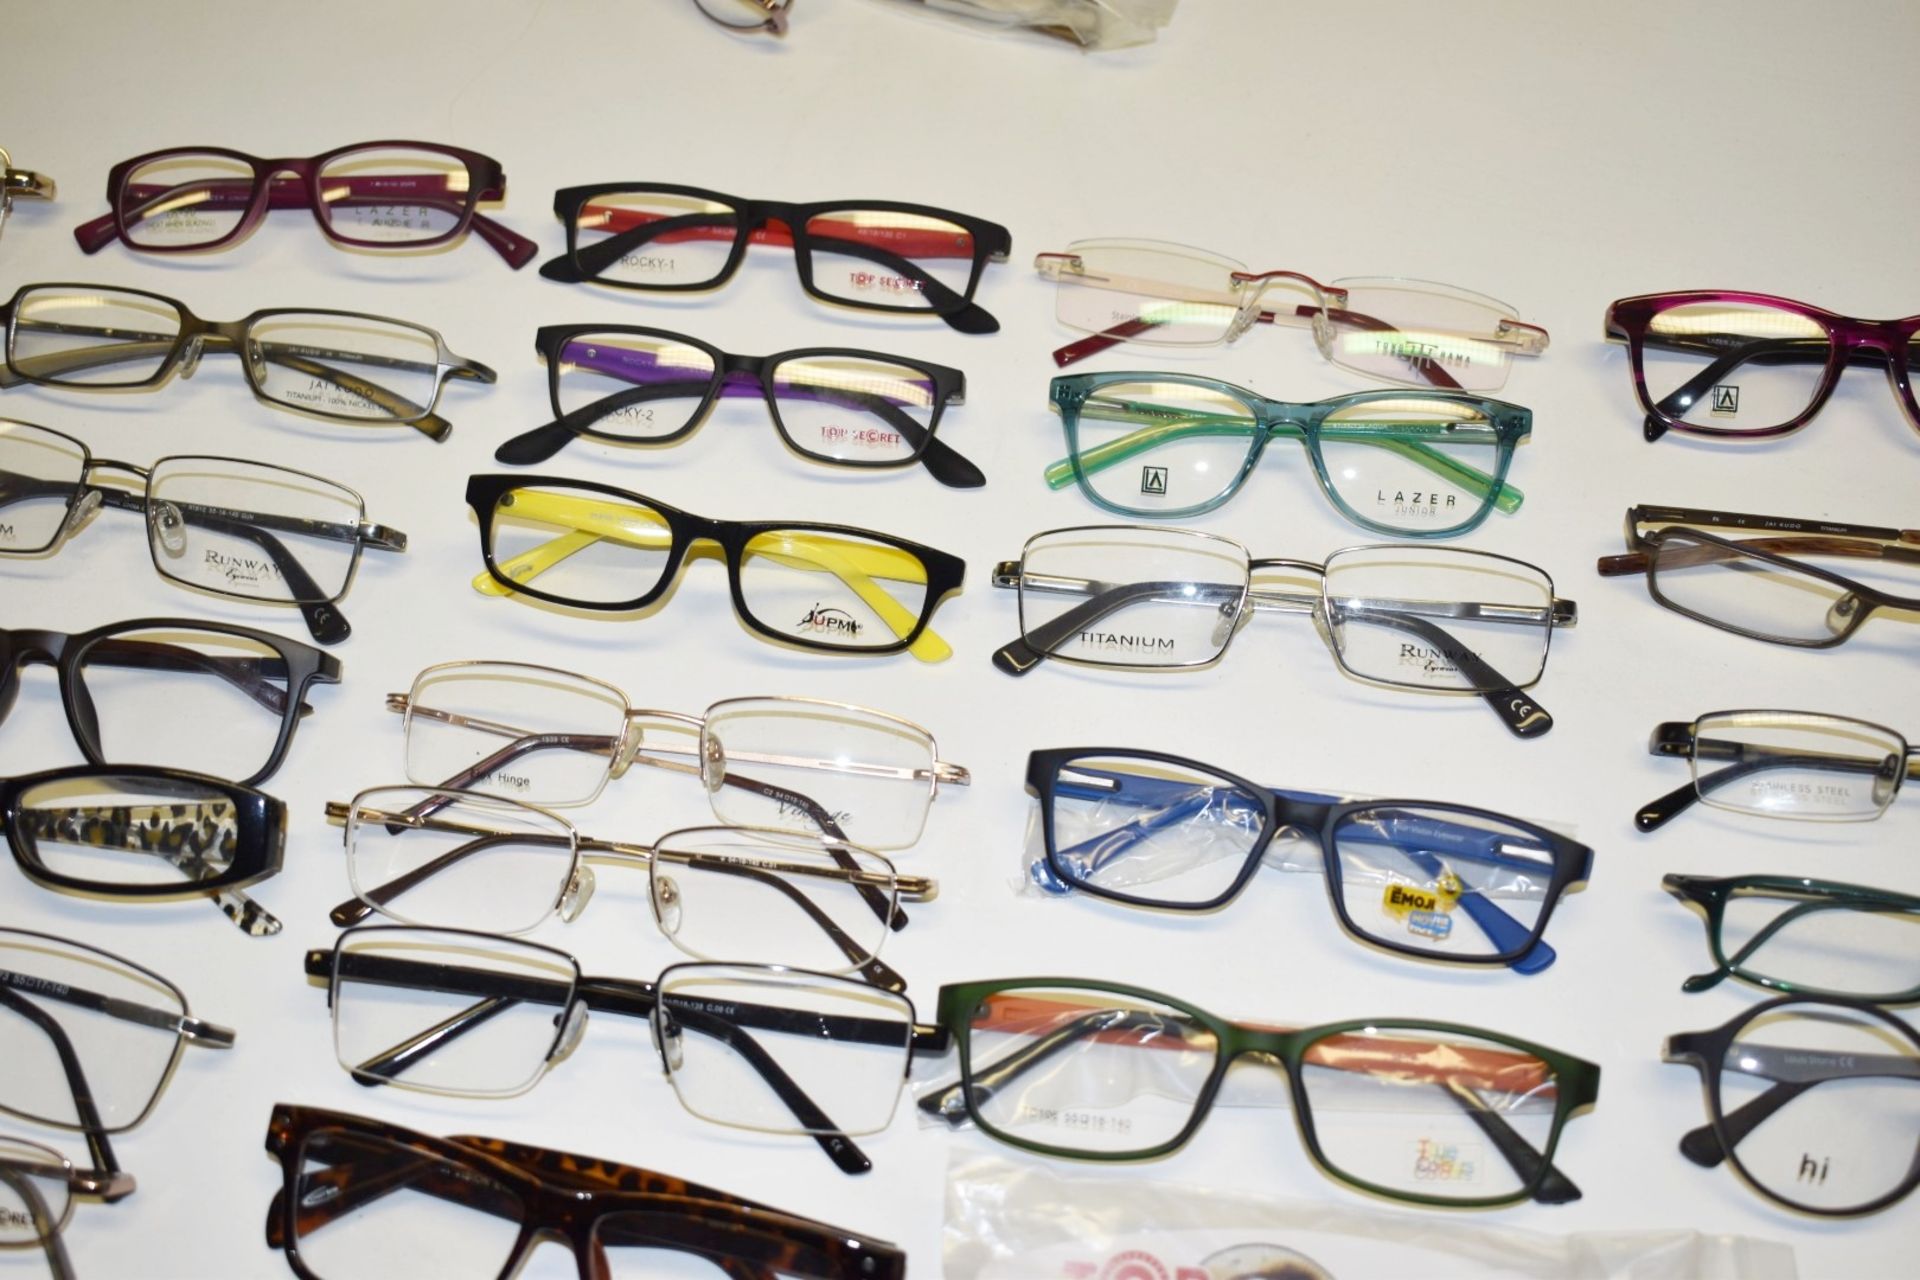 100 x Assorted Pairs of Spectacle Eye Glasses - New and Unused Stock - Various Designs and Brands - Image 23 of 27